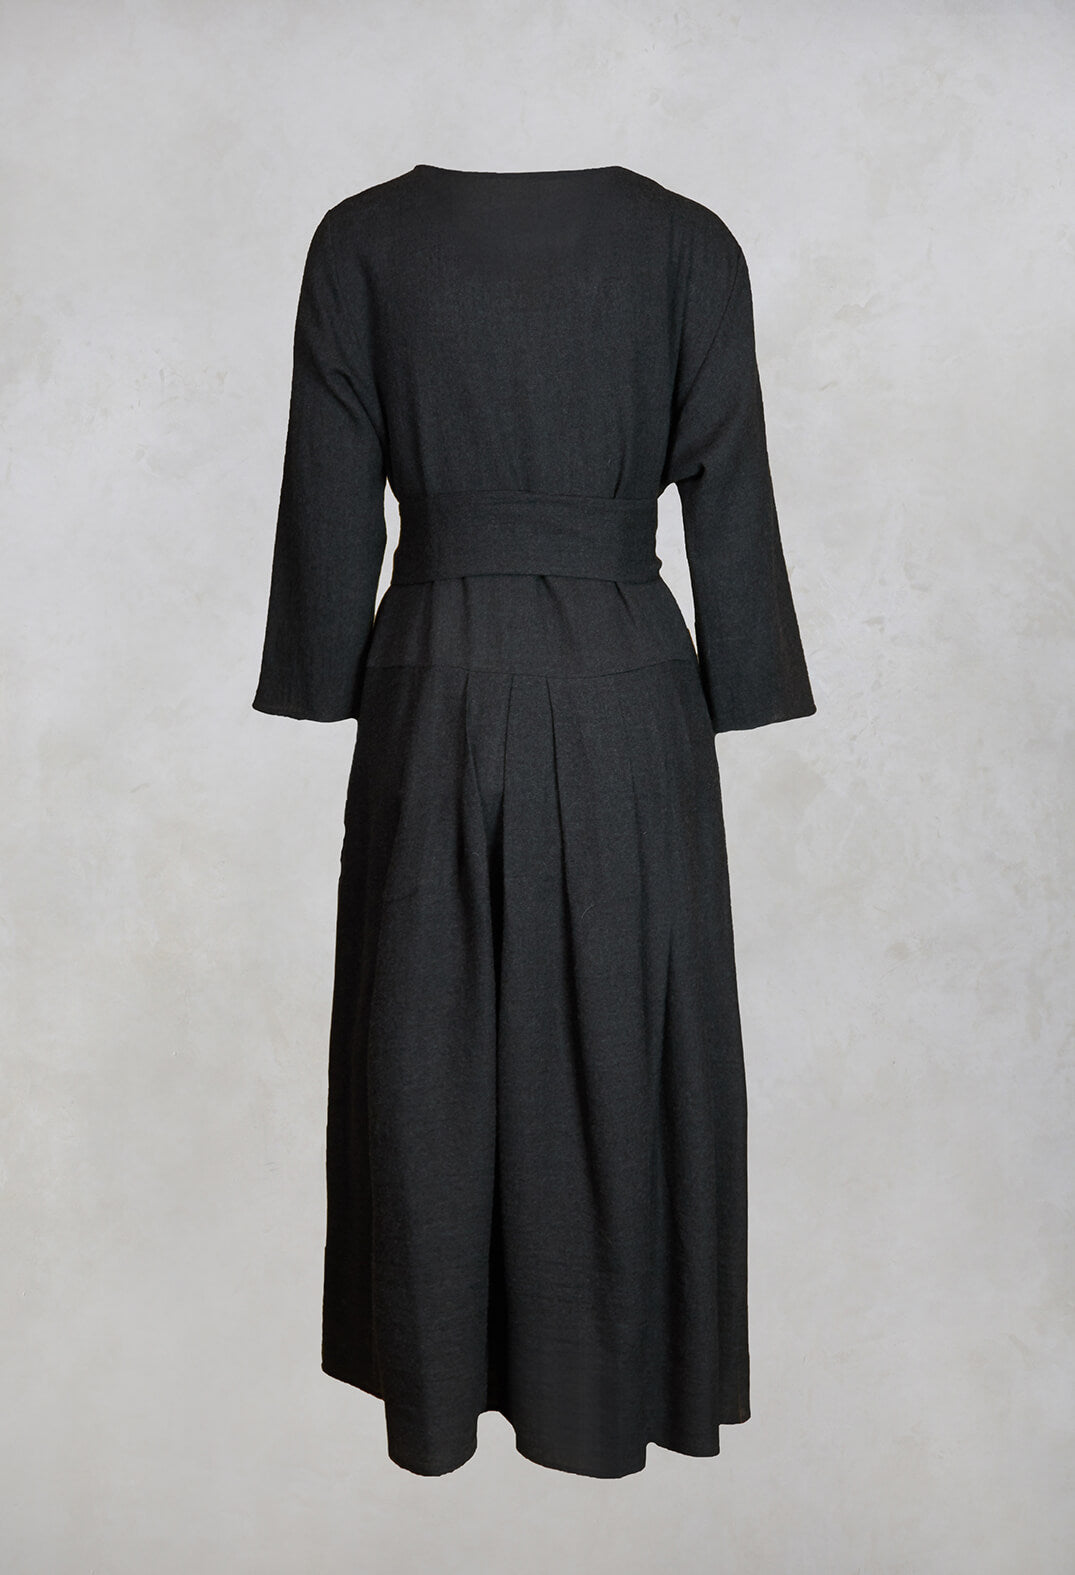 Dress in Charcoal Grey